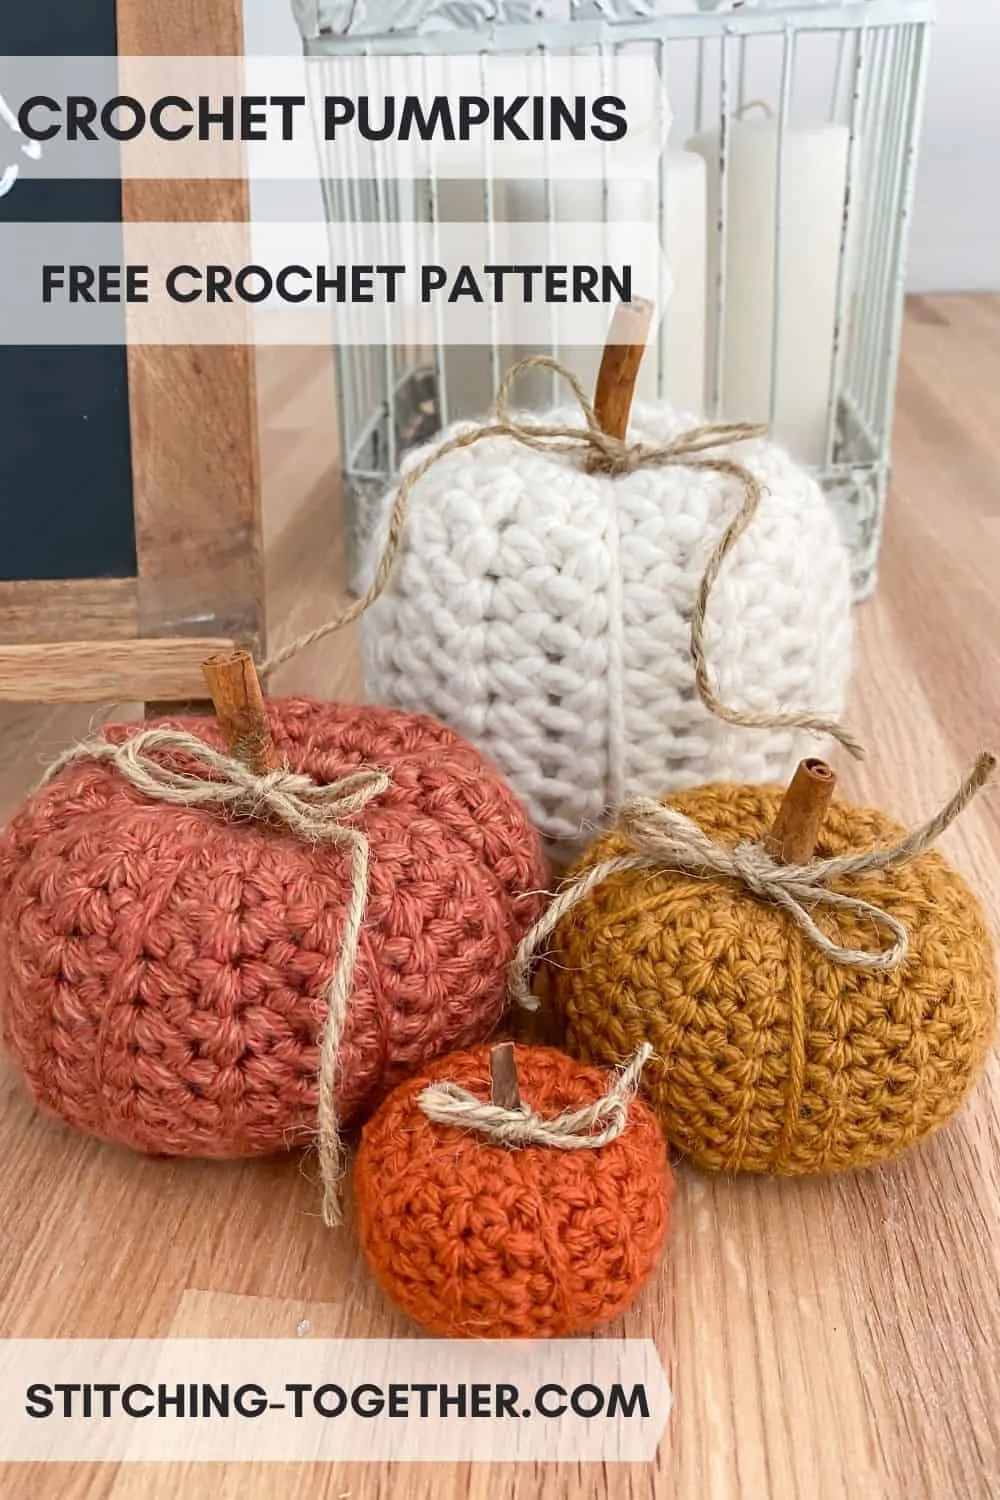 4 rustic crochet pumpkins with text on the image